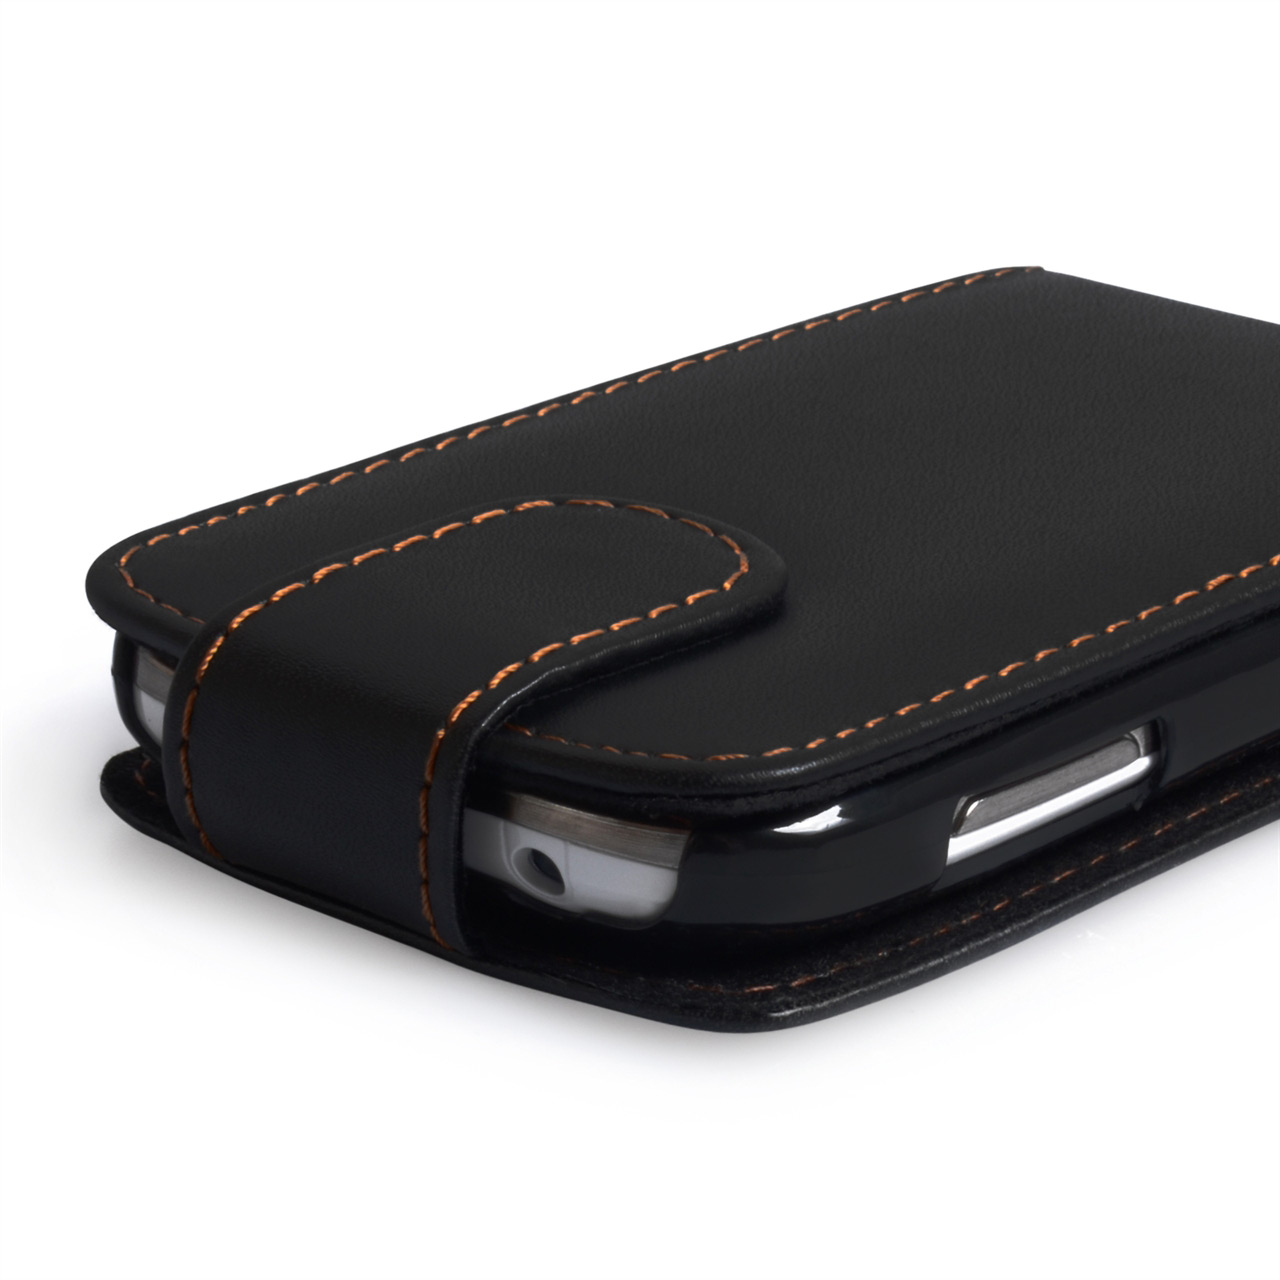 YouSave Samsung Galaxy Fame Leather Effect Flip Case - Black